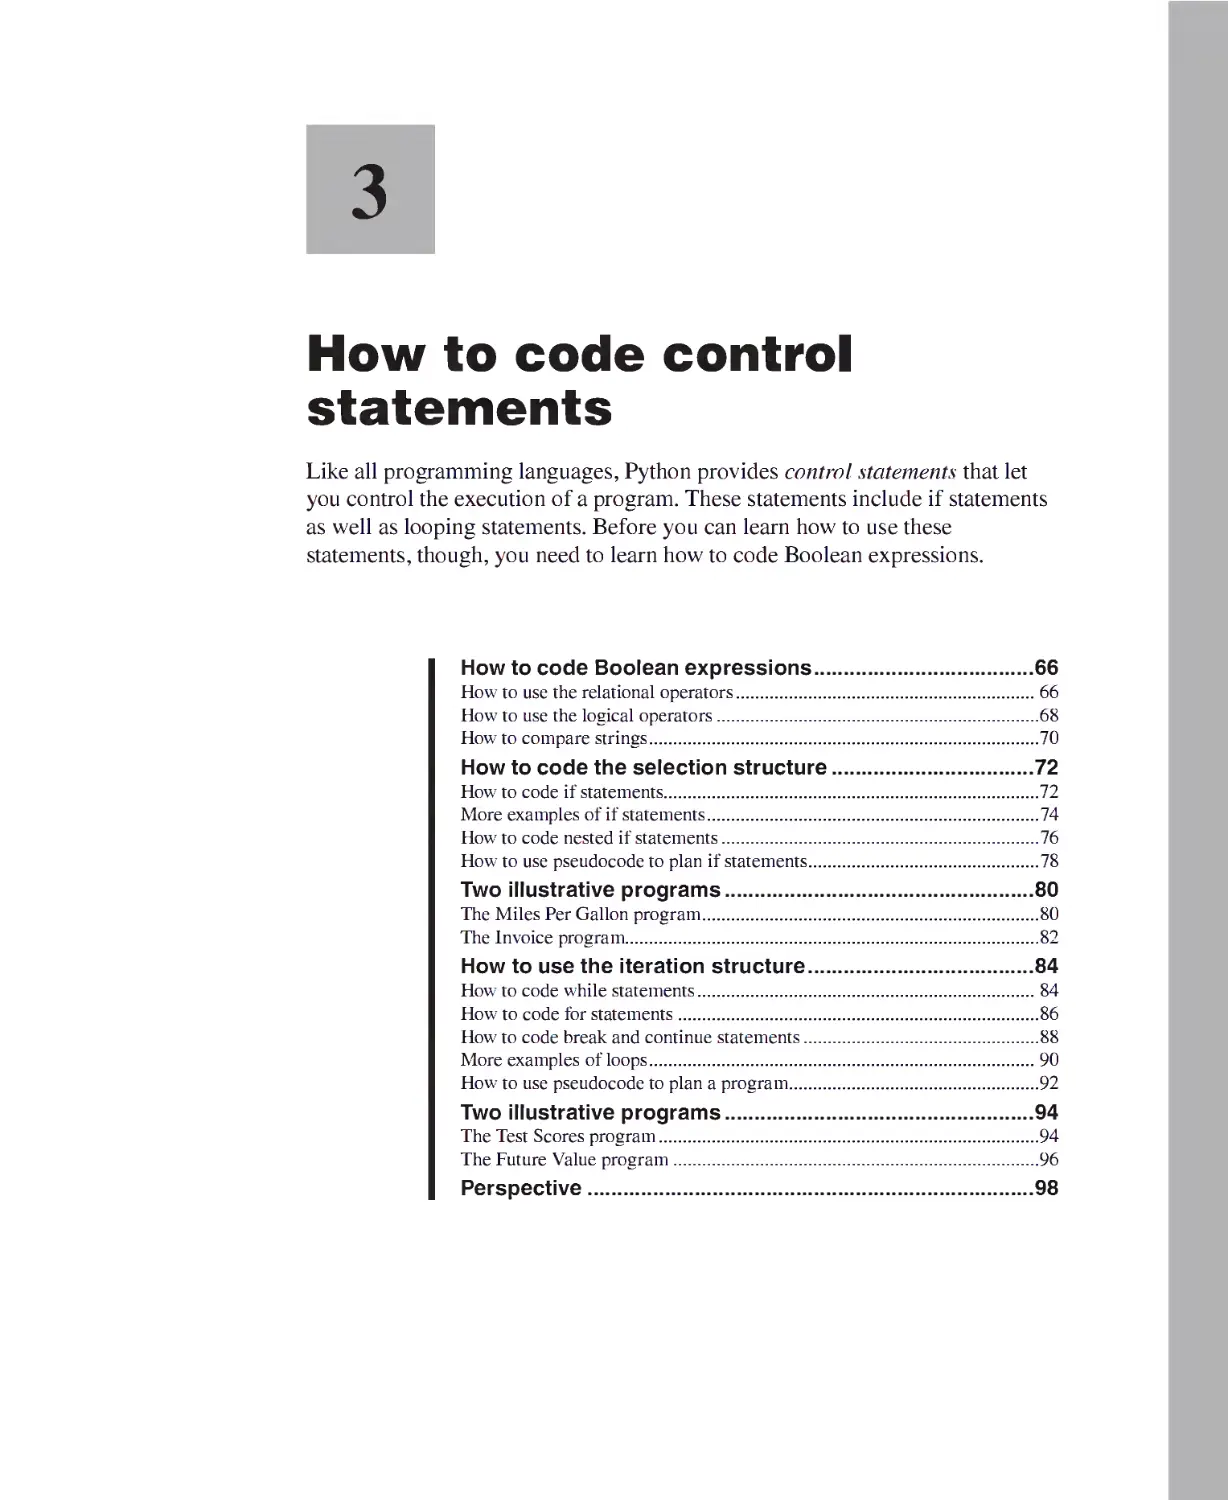 Chapter 3 - How to Code Control Statements